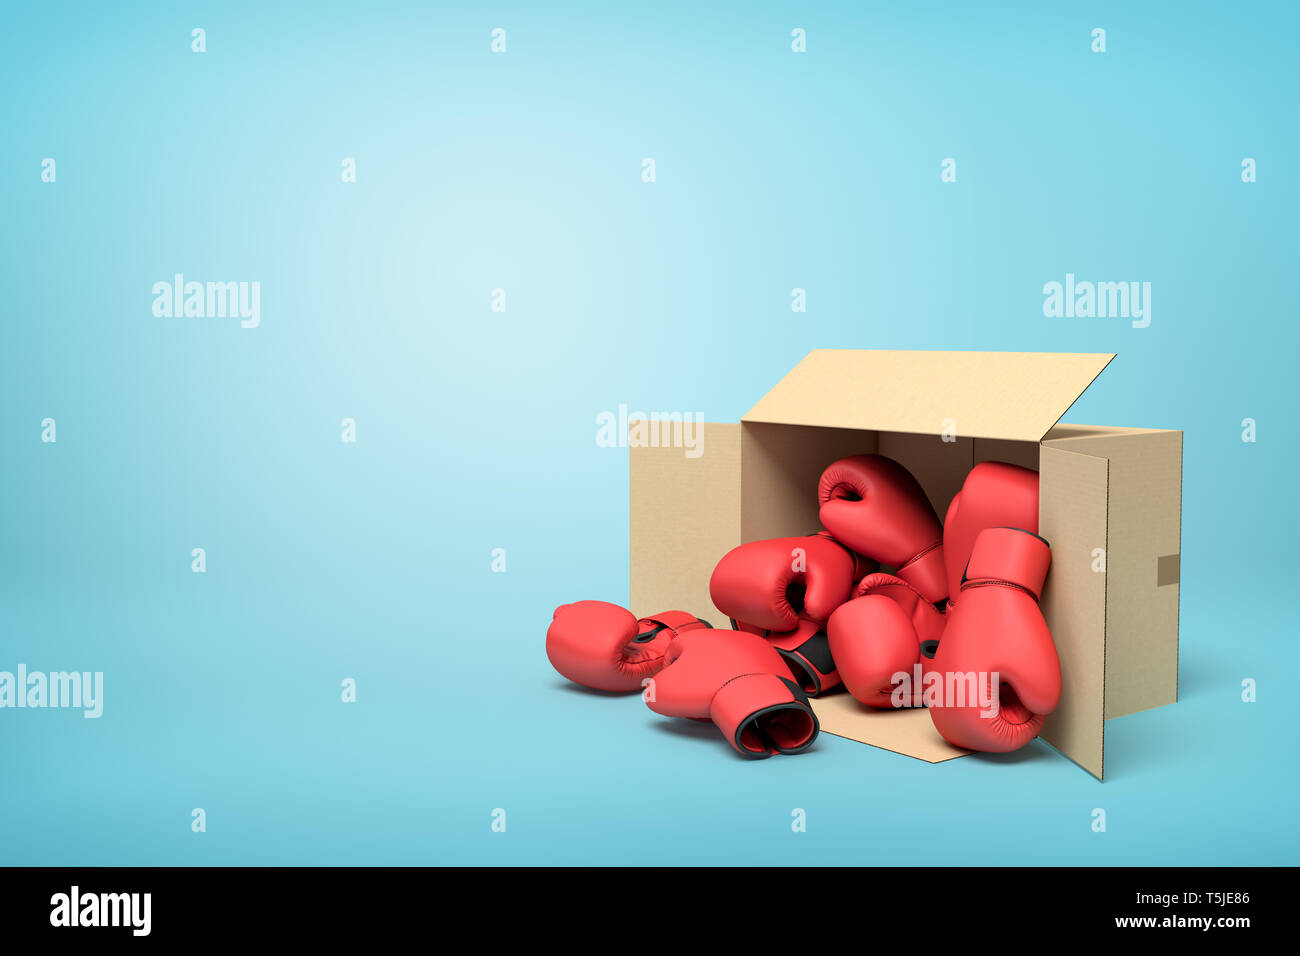 3d rendering of cardboard box lying sidelong full of red boxing gloves on light-blue background with much copy space. Stock Photo